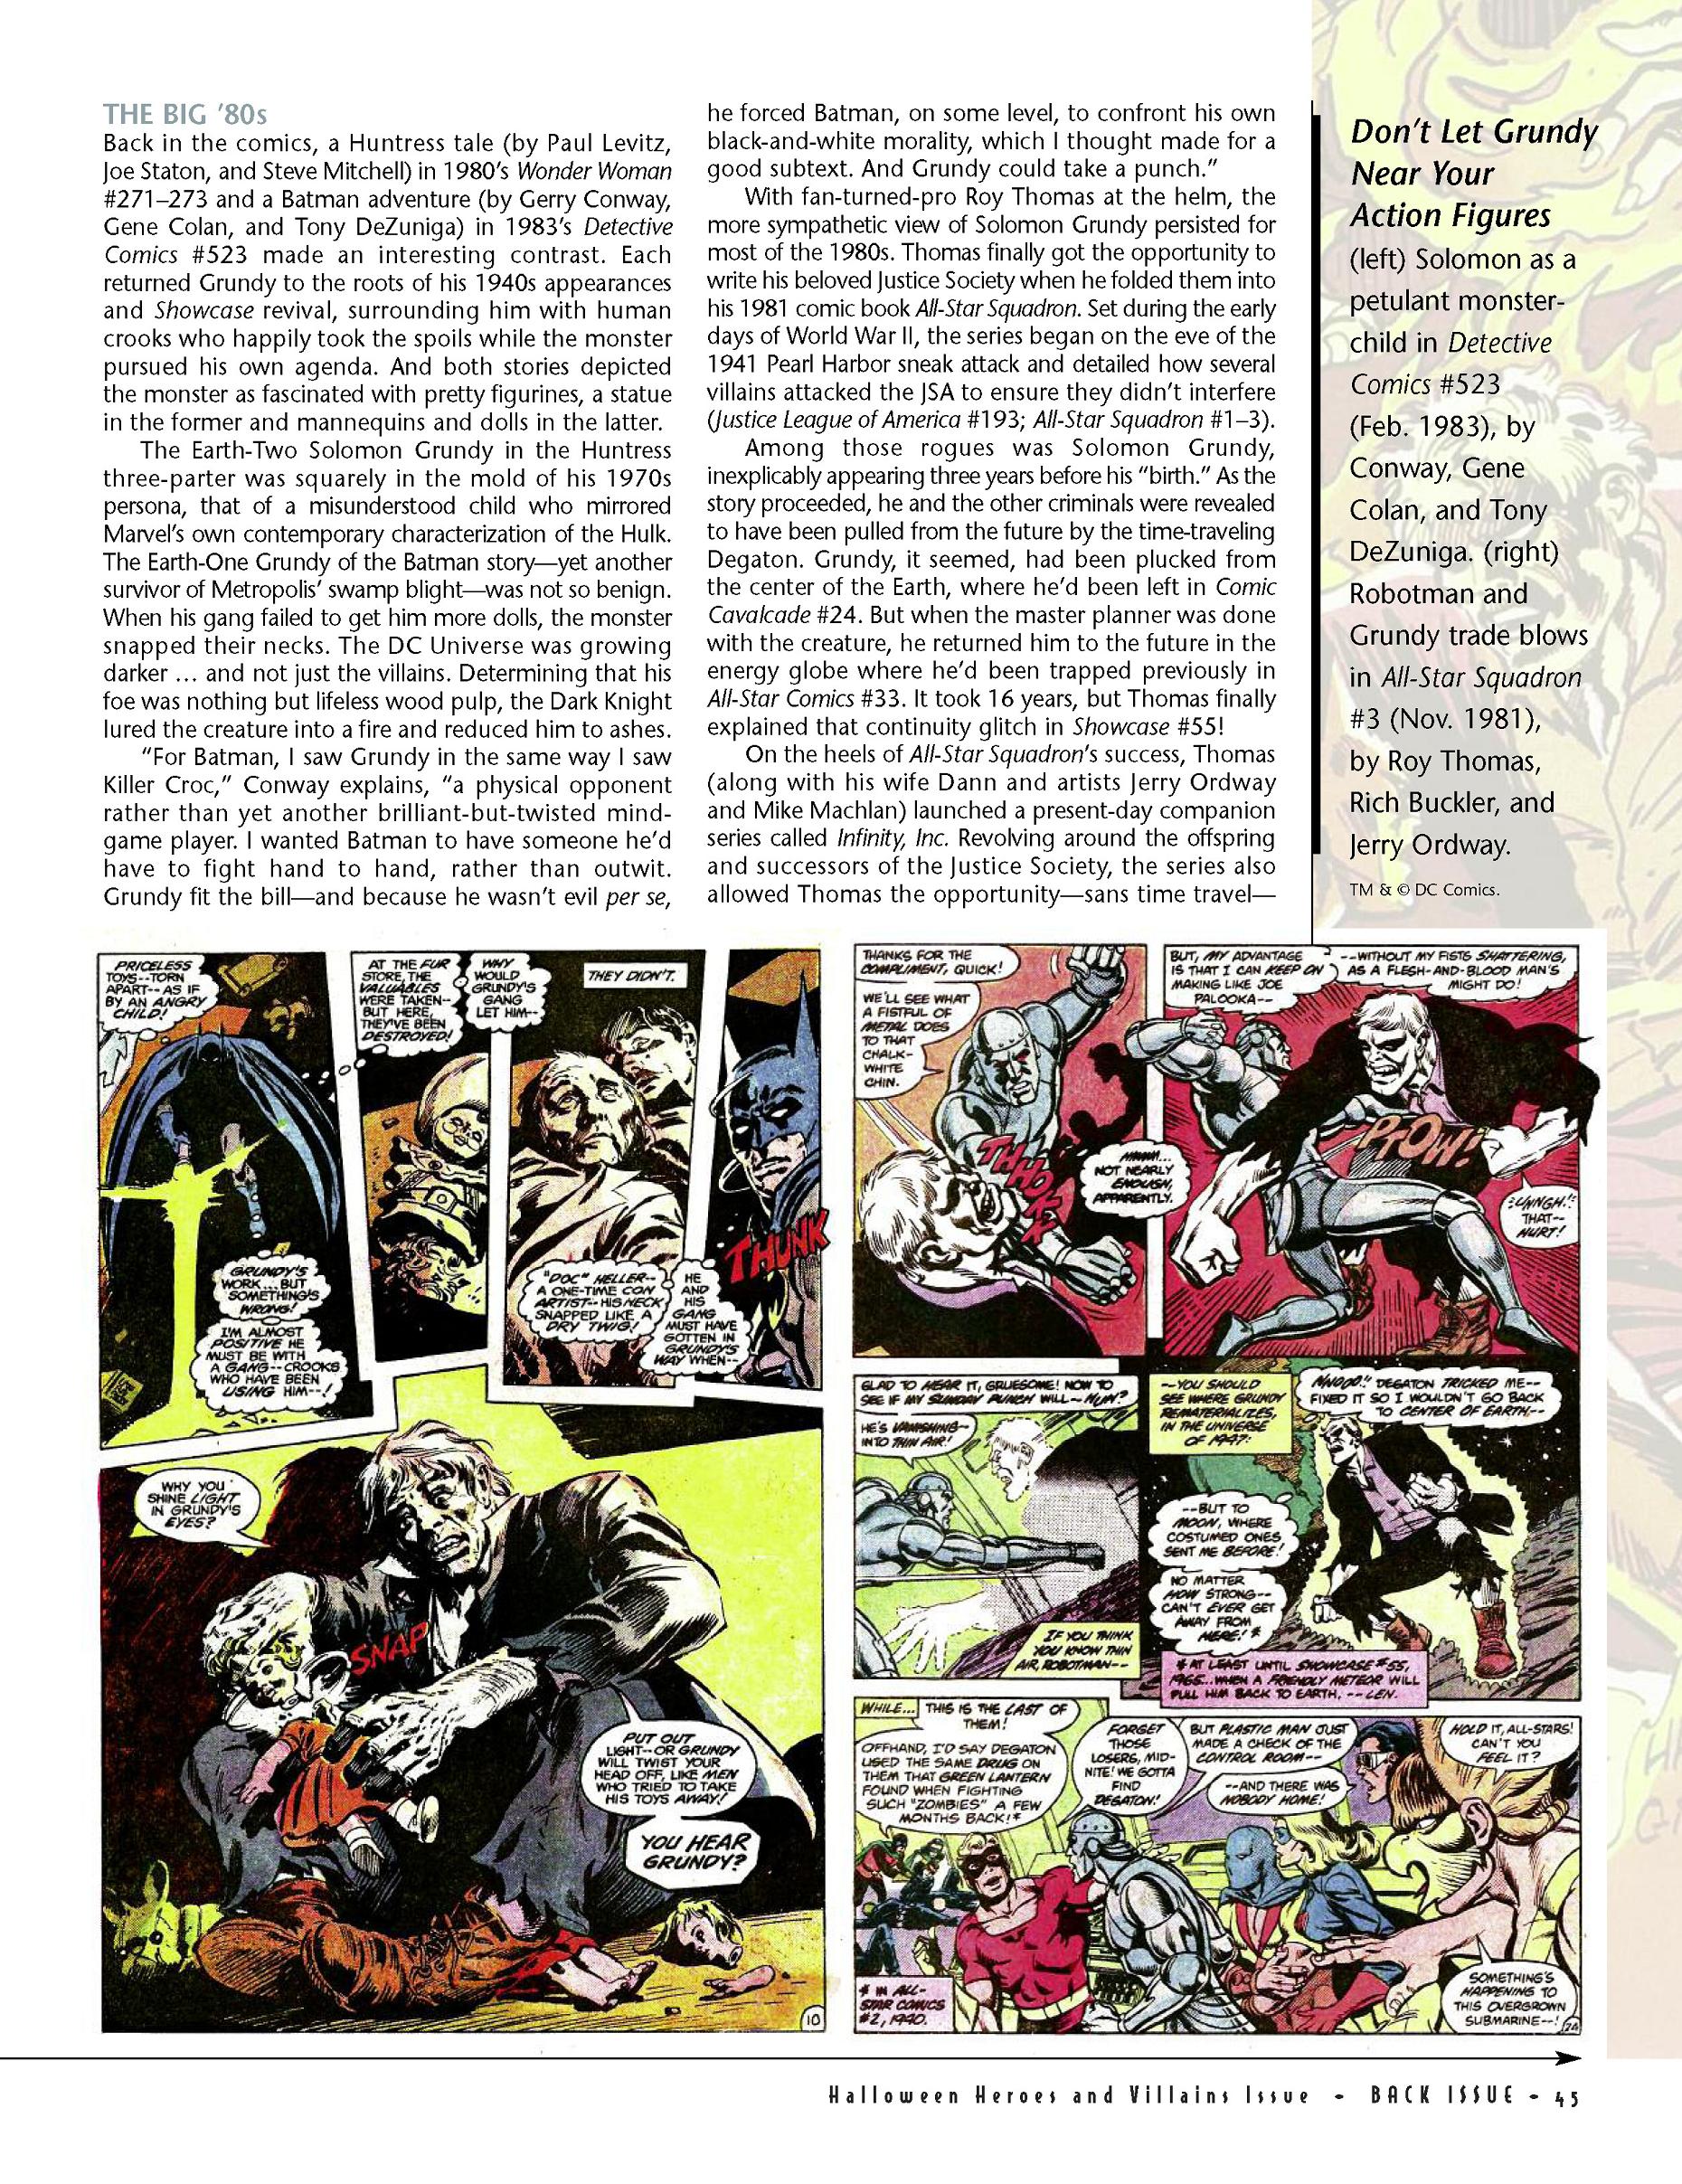 Read online Back Issue comic -  Issue #60 - 45